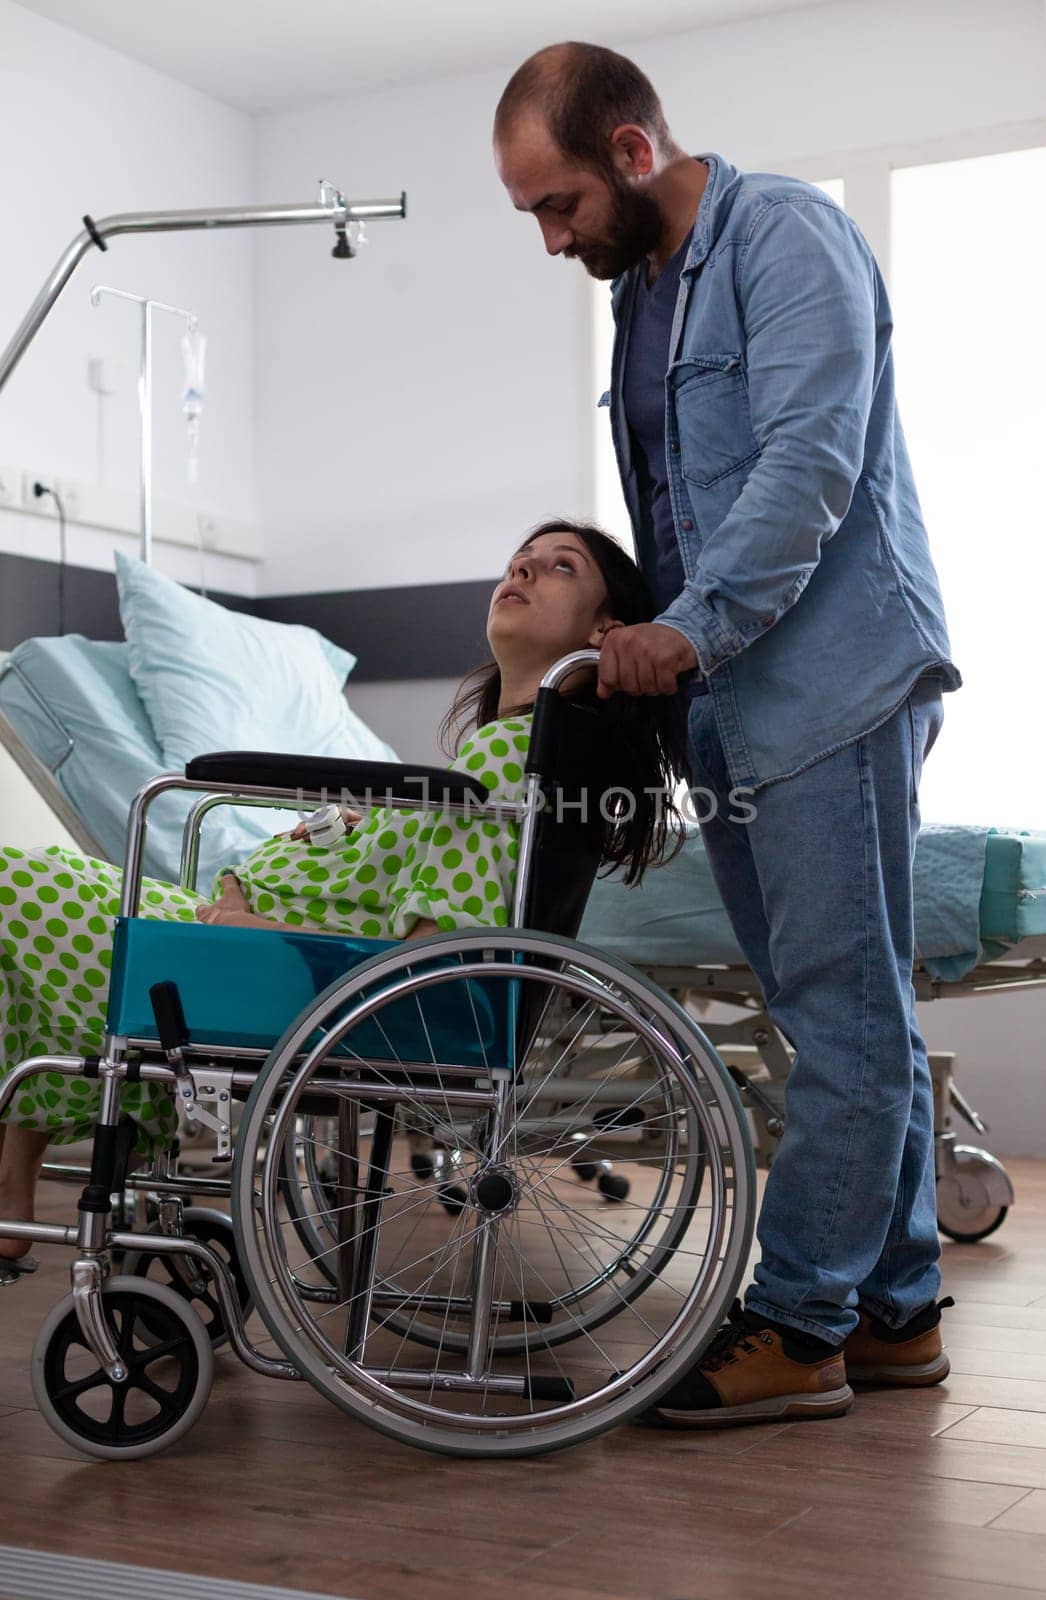 Husband taking pregnant woman in wheelchair to maternity room, preparing for baby delivery in hospital ward. Young couple getting ready for childbirth, discussing parenthood. Birth concept